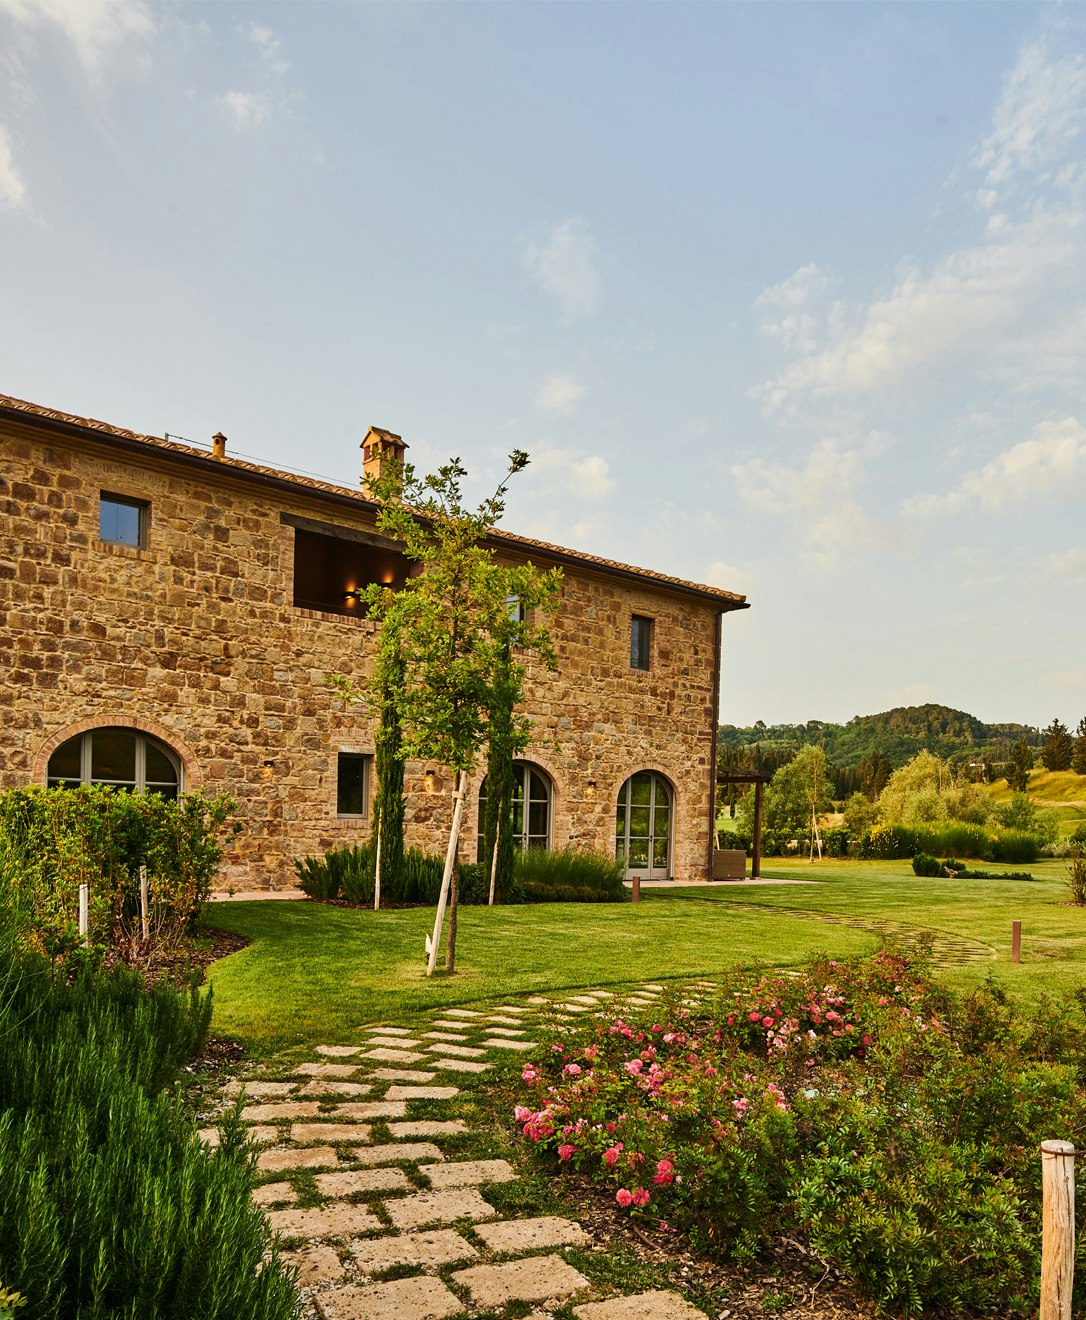 Luxury holiday villa in the heart of Tuscany with comforts of a 5-star resort